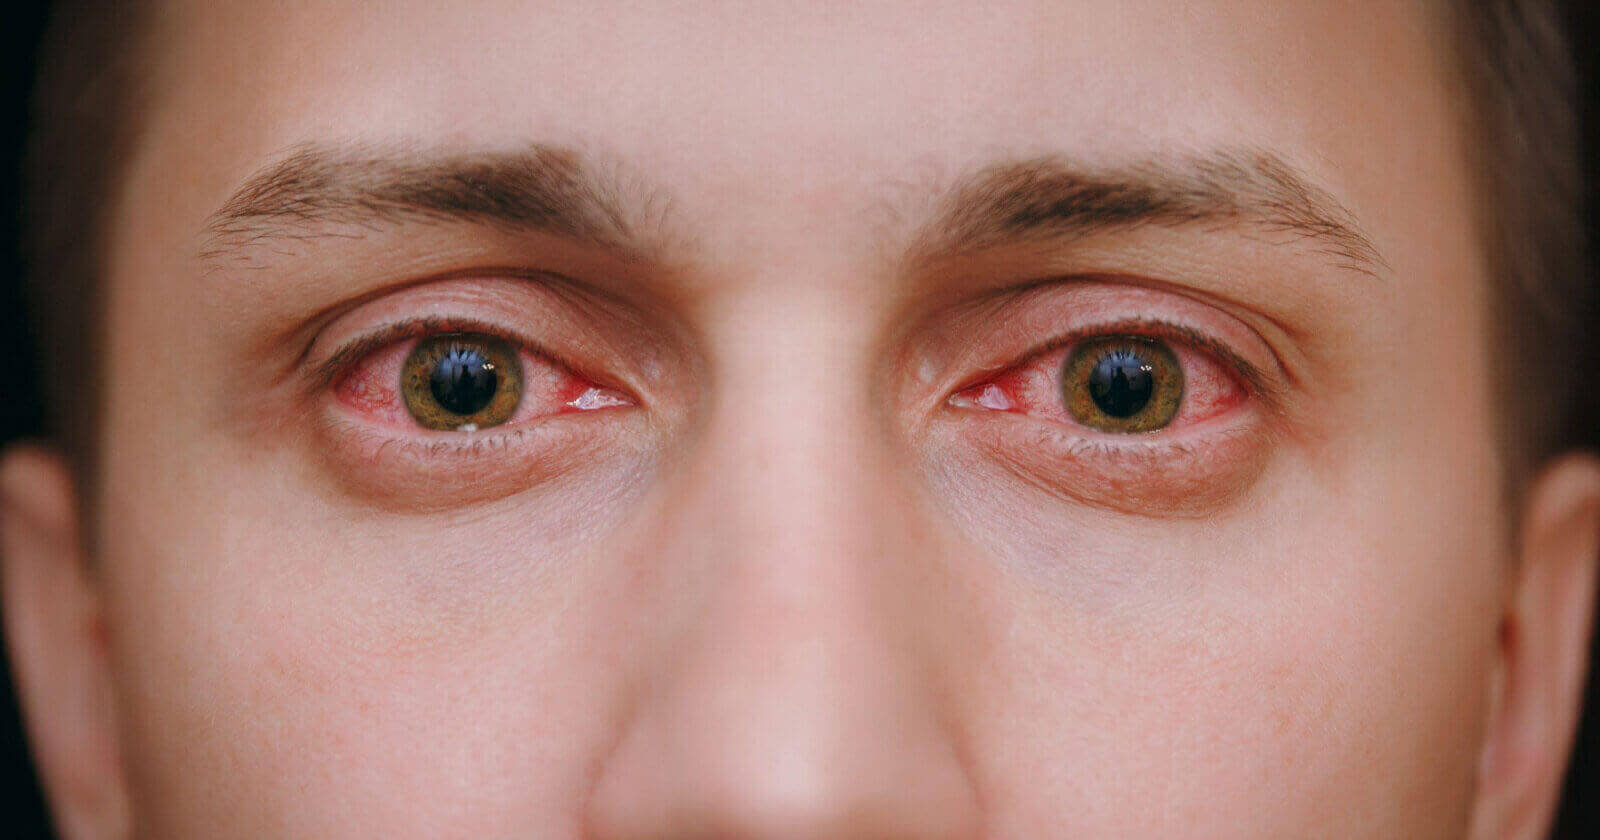 Overview of Red Eye: Definition, symptoms, causes and treatment